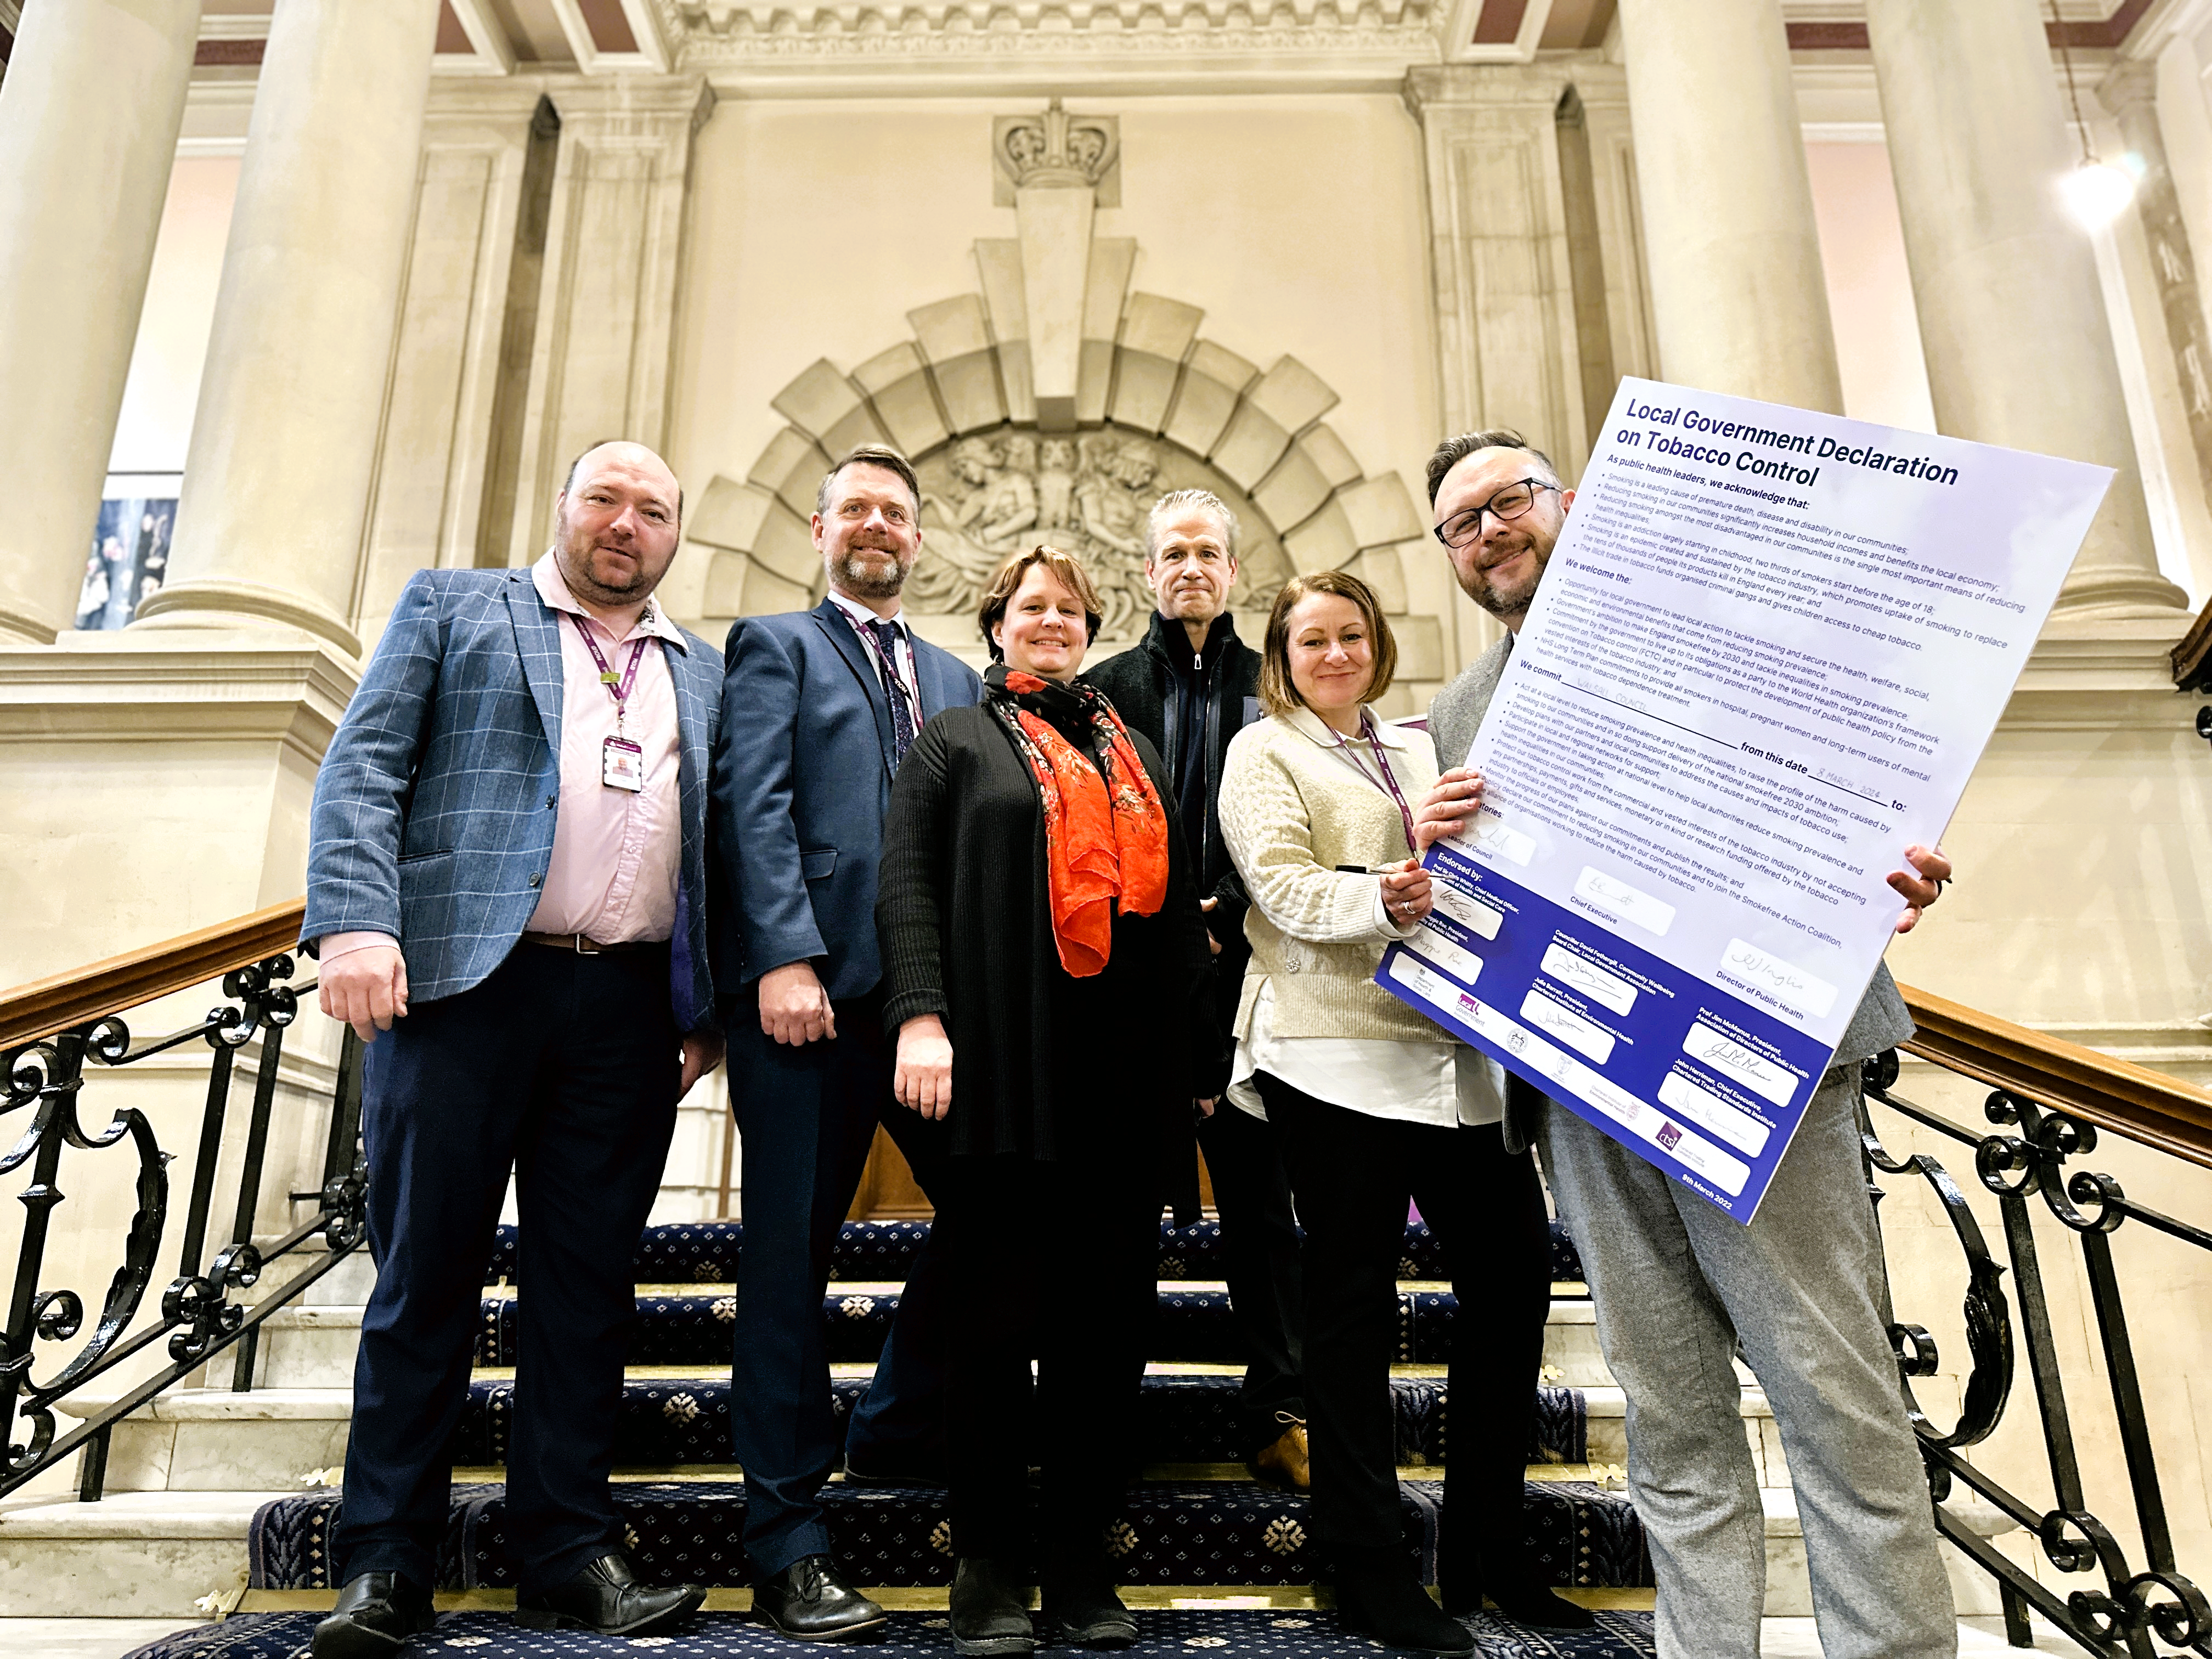 Councillors Flint and Gary Perry, Emma Bennett, Joe Holding and David Erlington at the Tobacco Declaration signing event